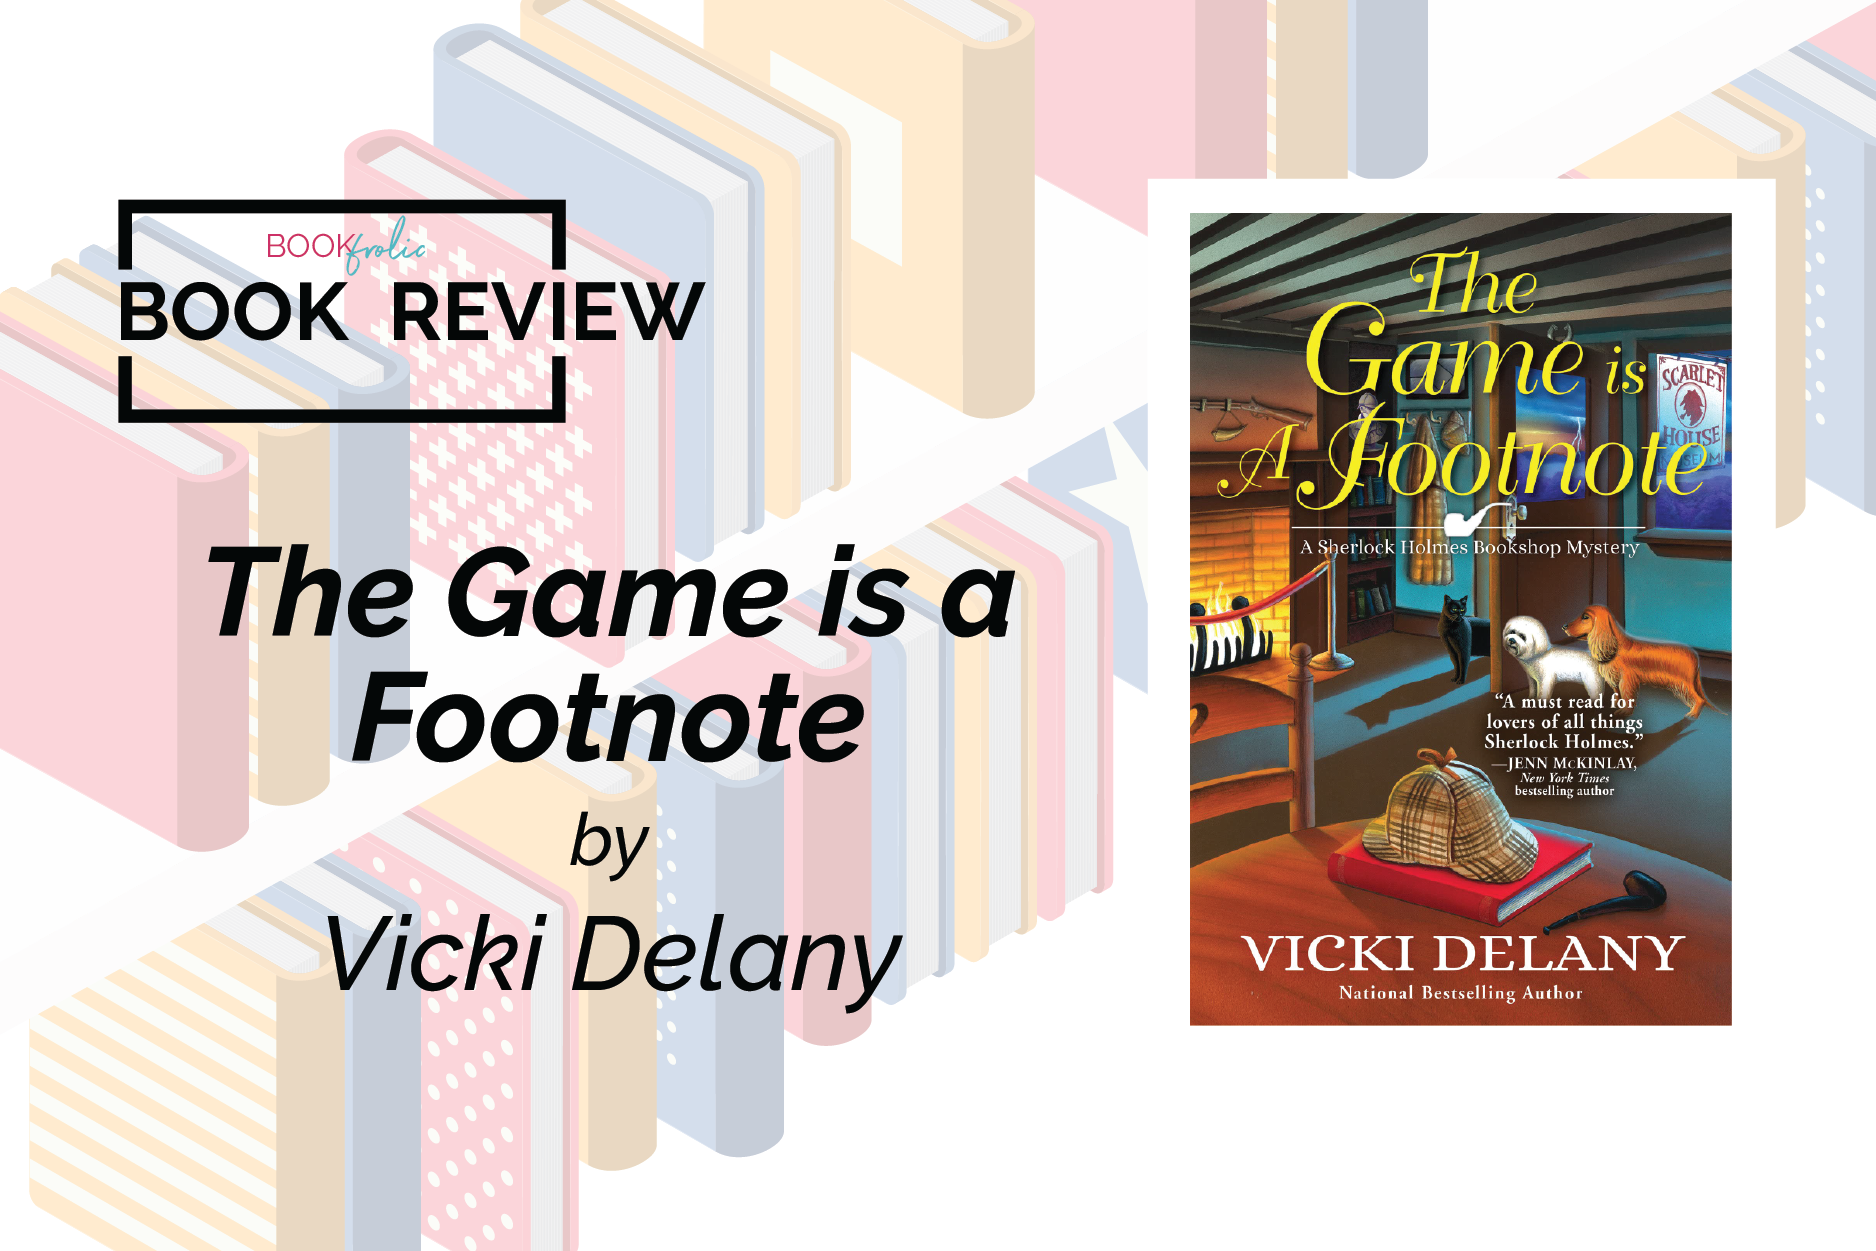 banner for book review of The Game is a Footnote by Vicki Delany